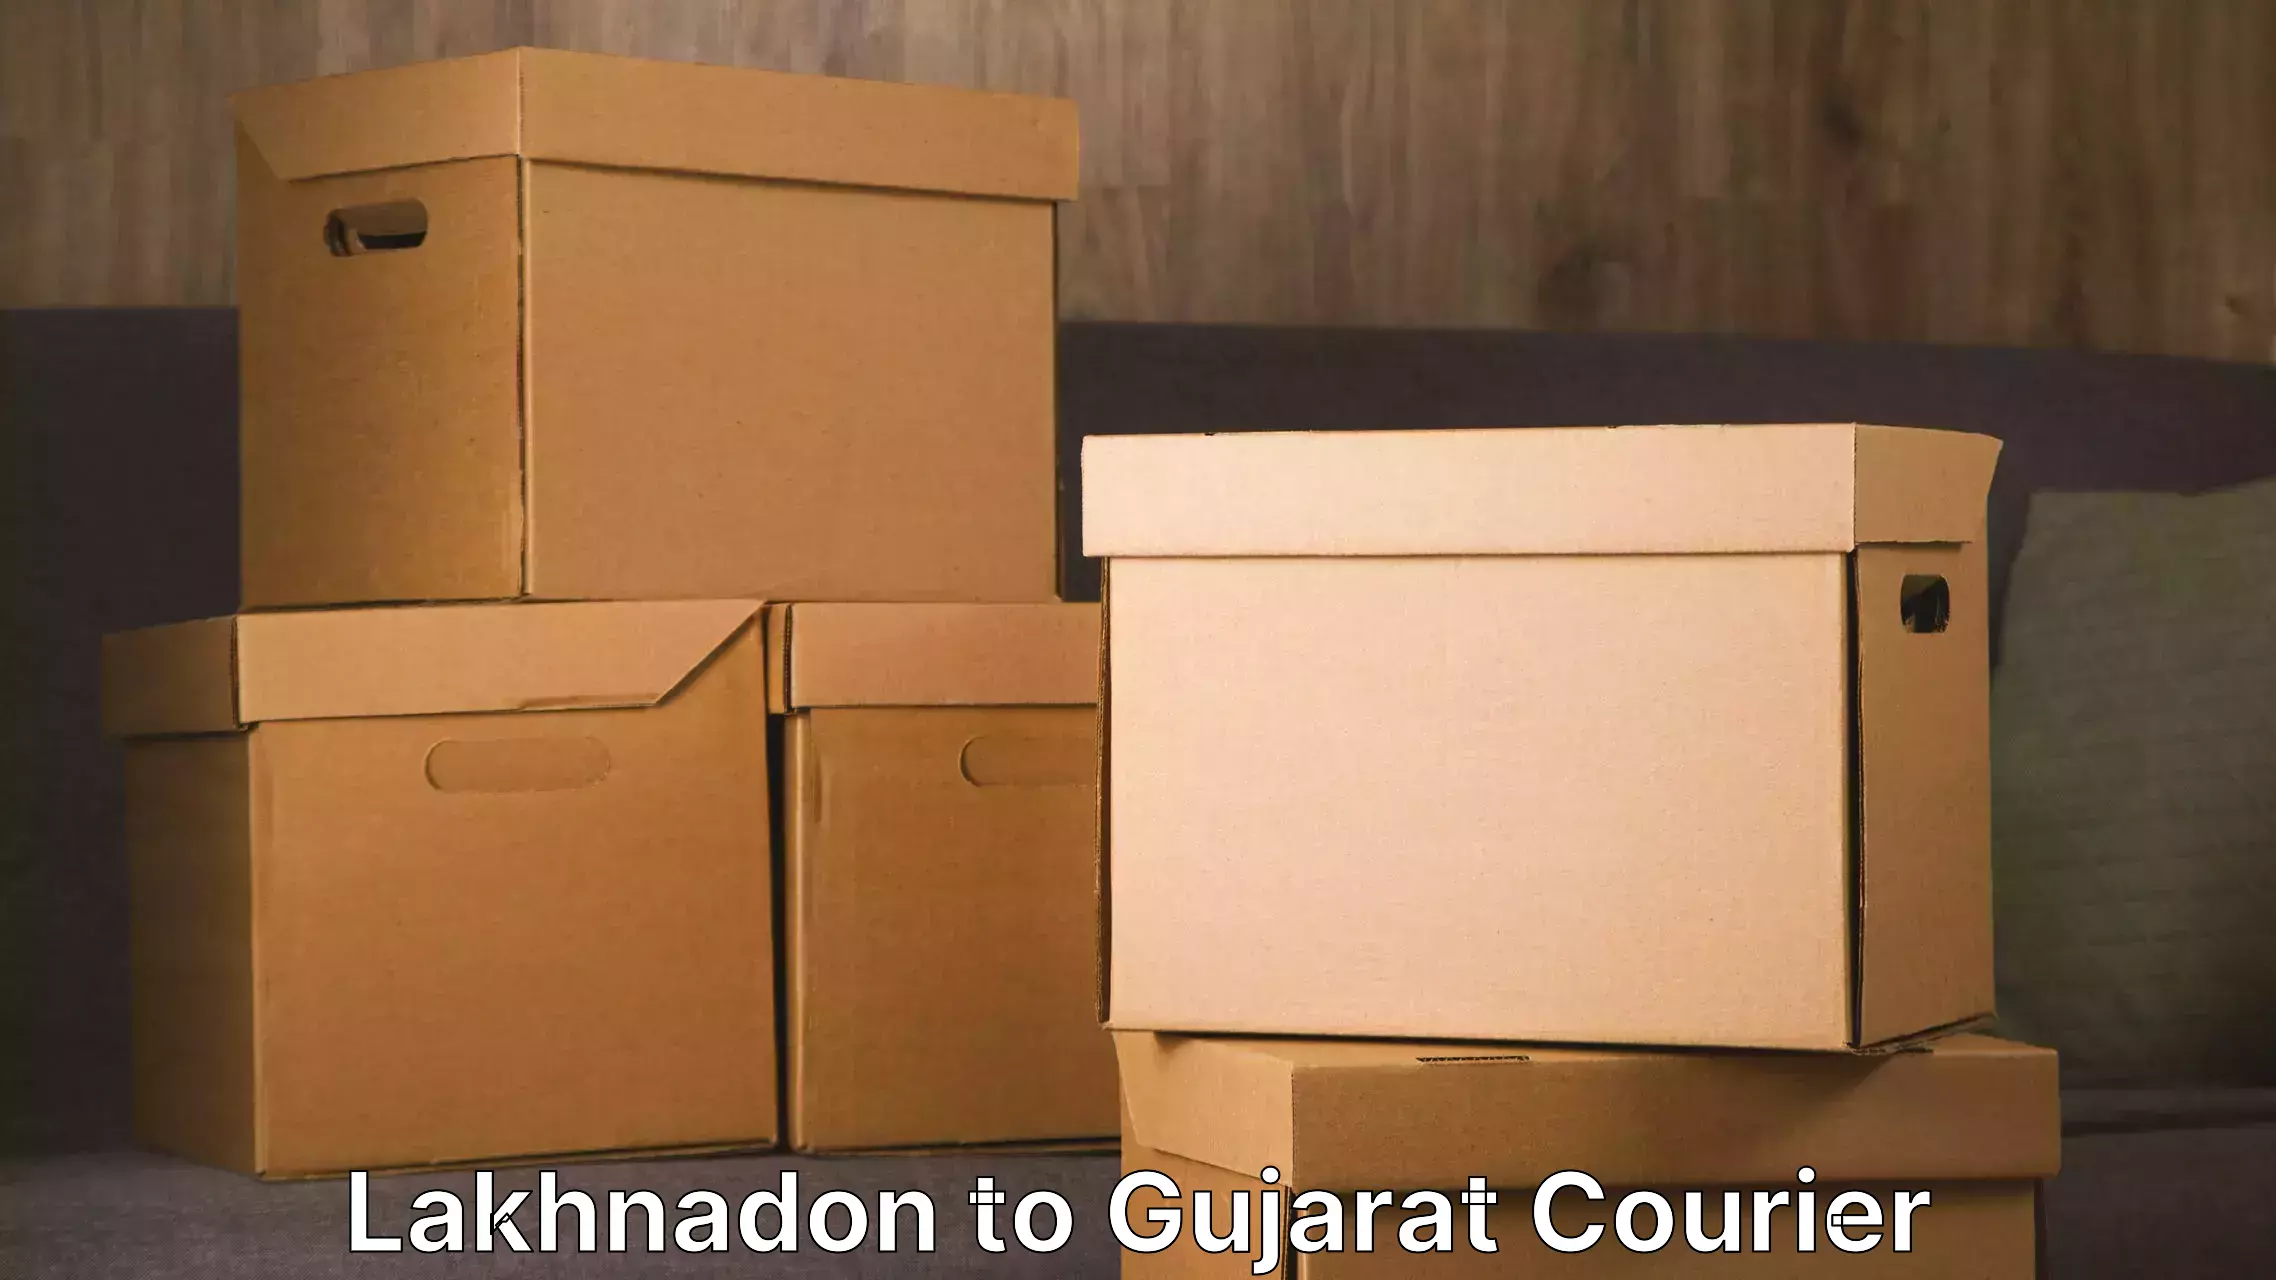 Moving and storage services Lakhnadon to Ahmedabad